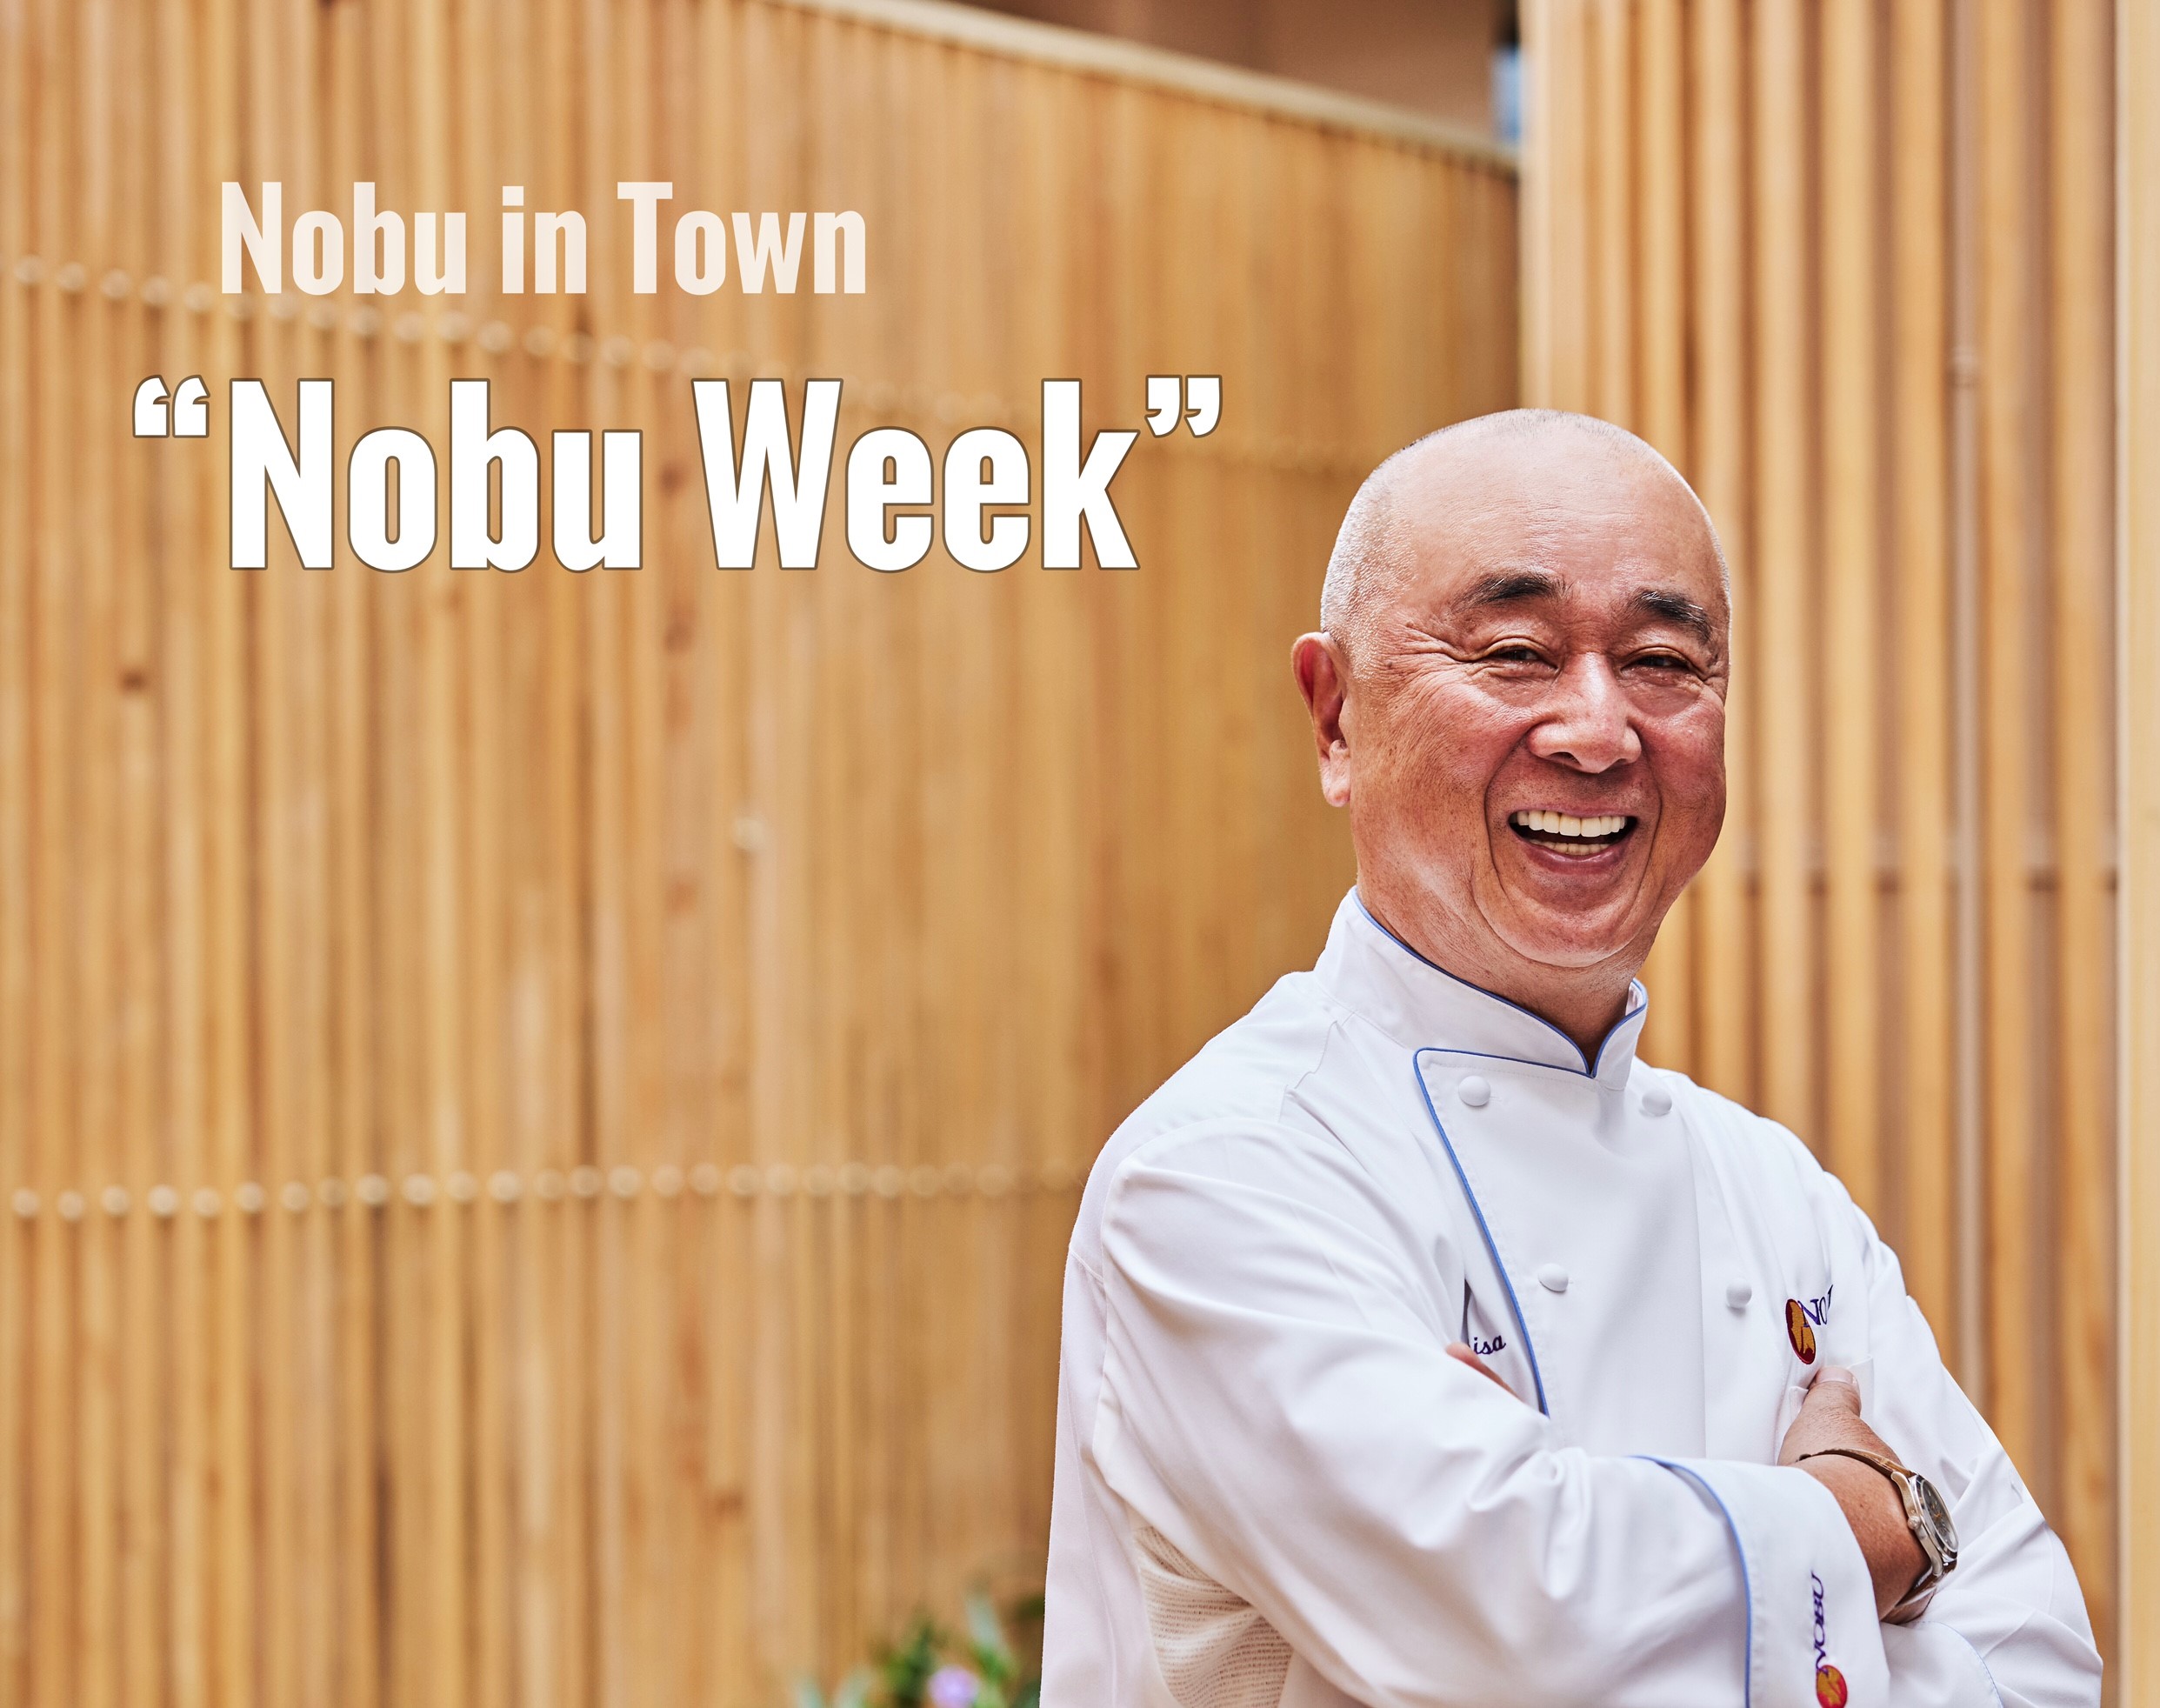      Jan 25th (Wed) - 27th (Fri) *Dinner time only Special Chef Nobu Omakase available only for the 3 nights event. 